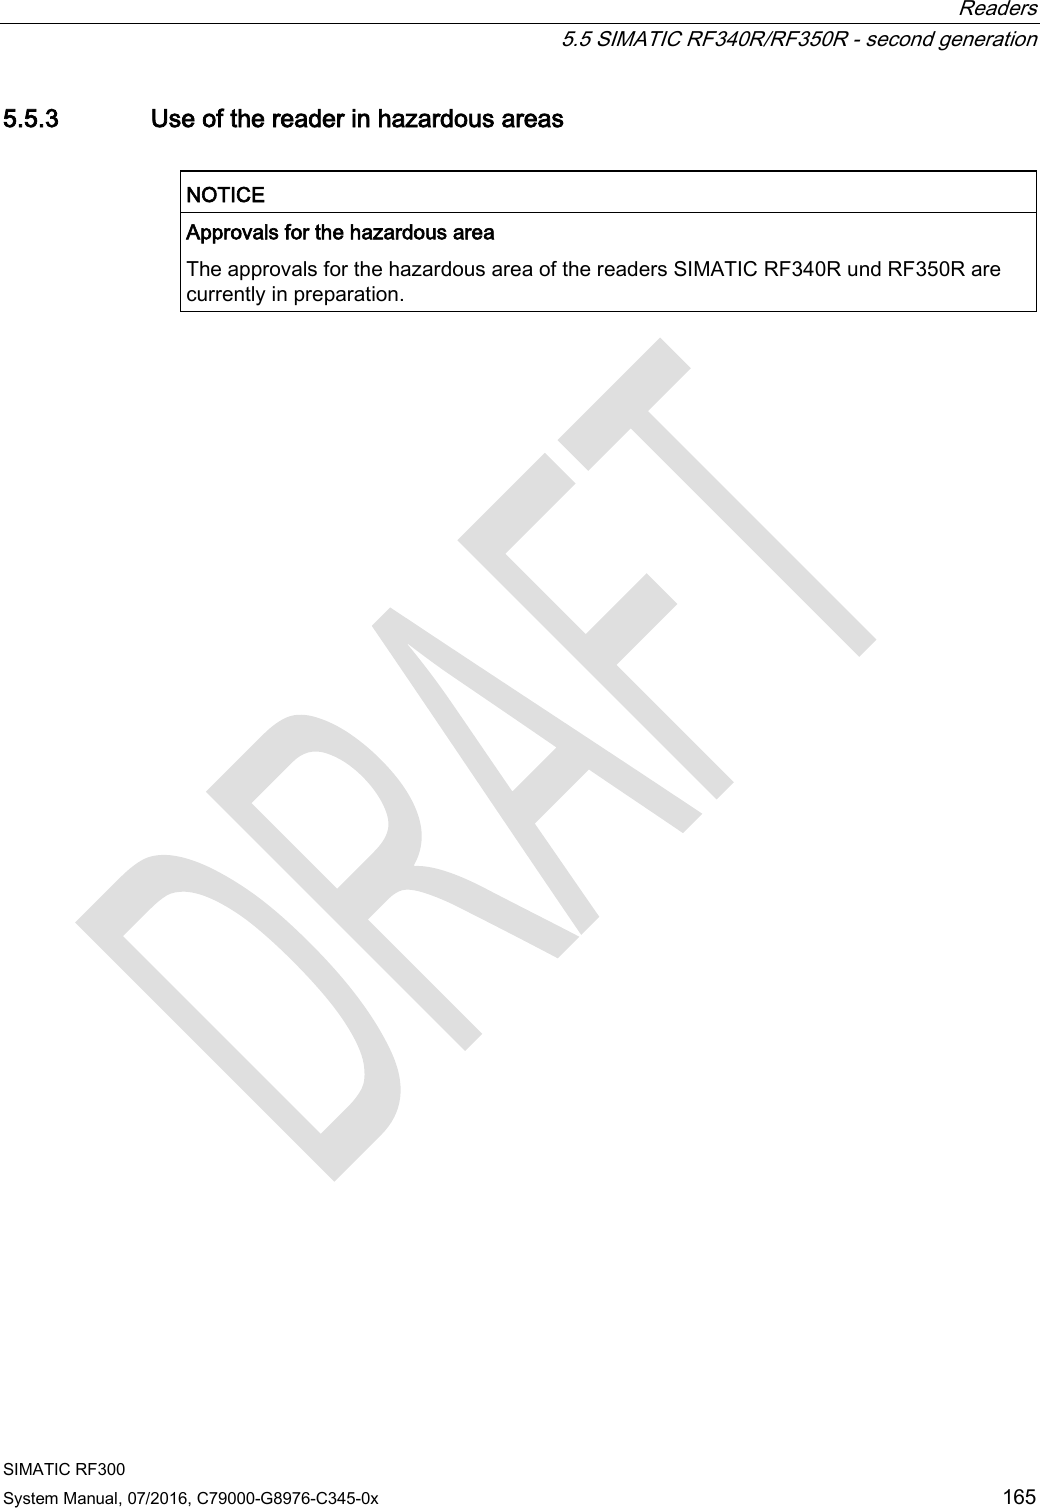  Readers  5.5 SIMATIC RF340R/RF350R - second generation SIMATIC RF300 System Manual, 07/2016, C79000-G8976-C345-0x 165 5.5.3 Use of the reader in hazardous areas   NOTICE Approvals for the hazardous area The approvals for the hazardous area of the readers SIMATIC RF340R und RF350R are currently in preparation.  